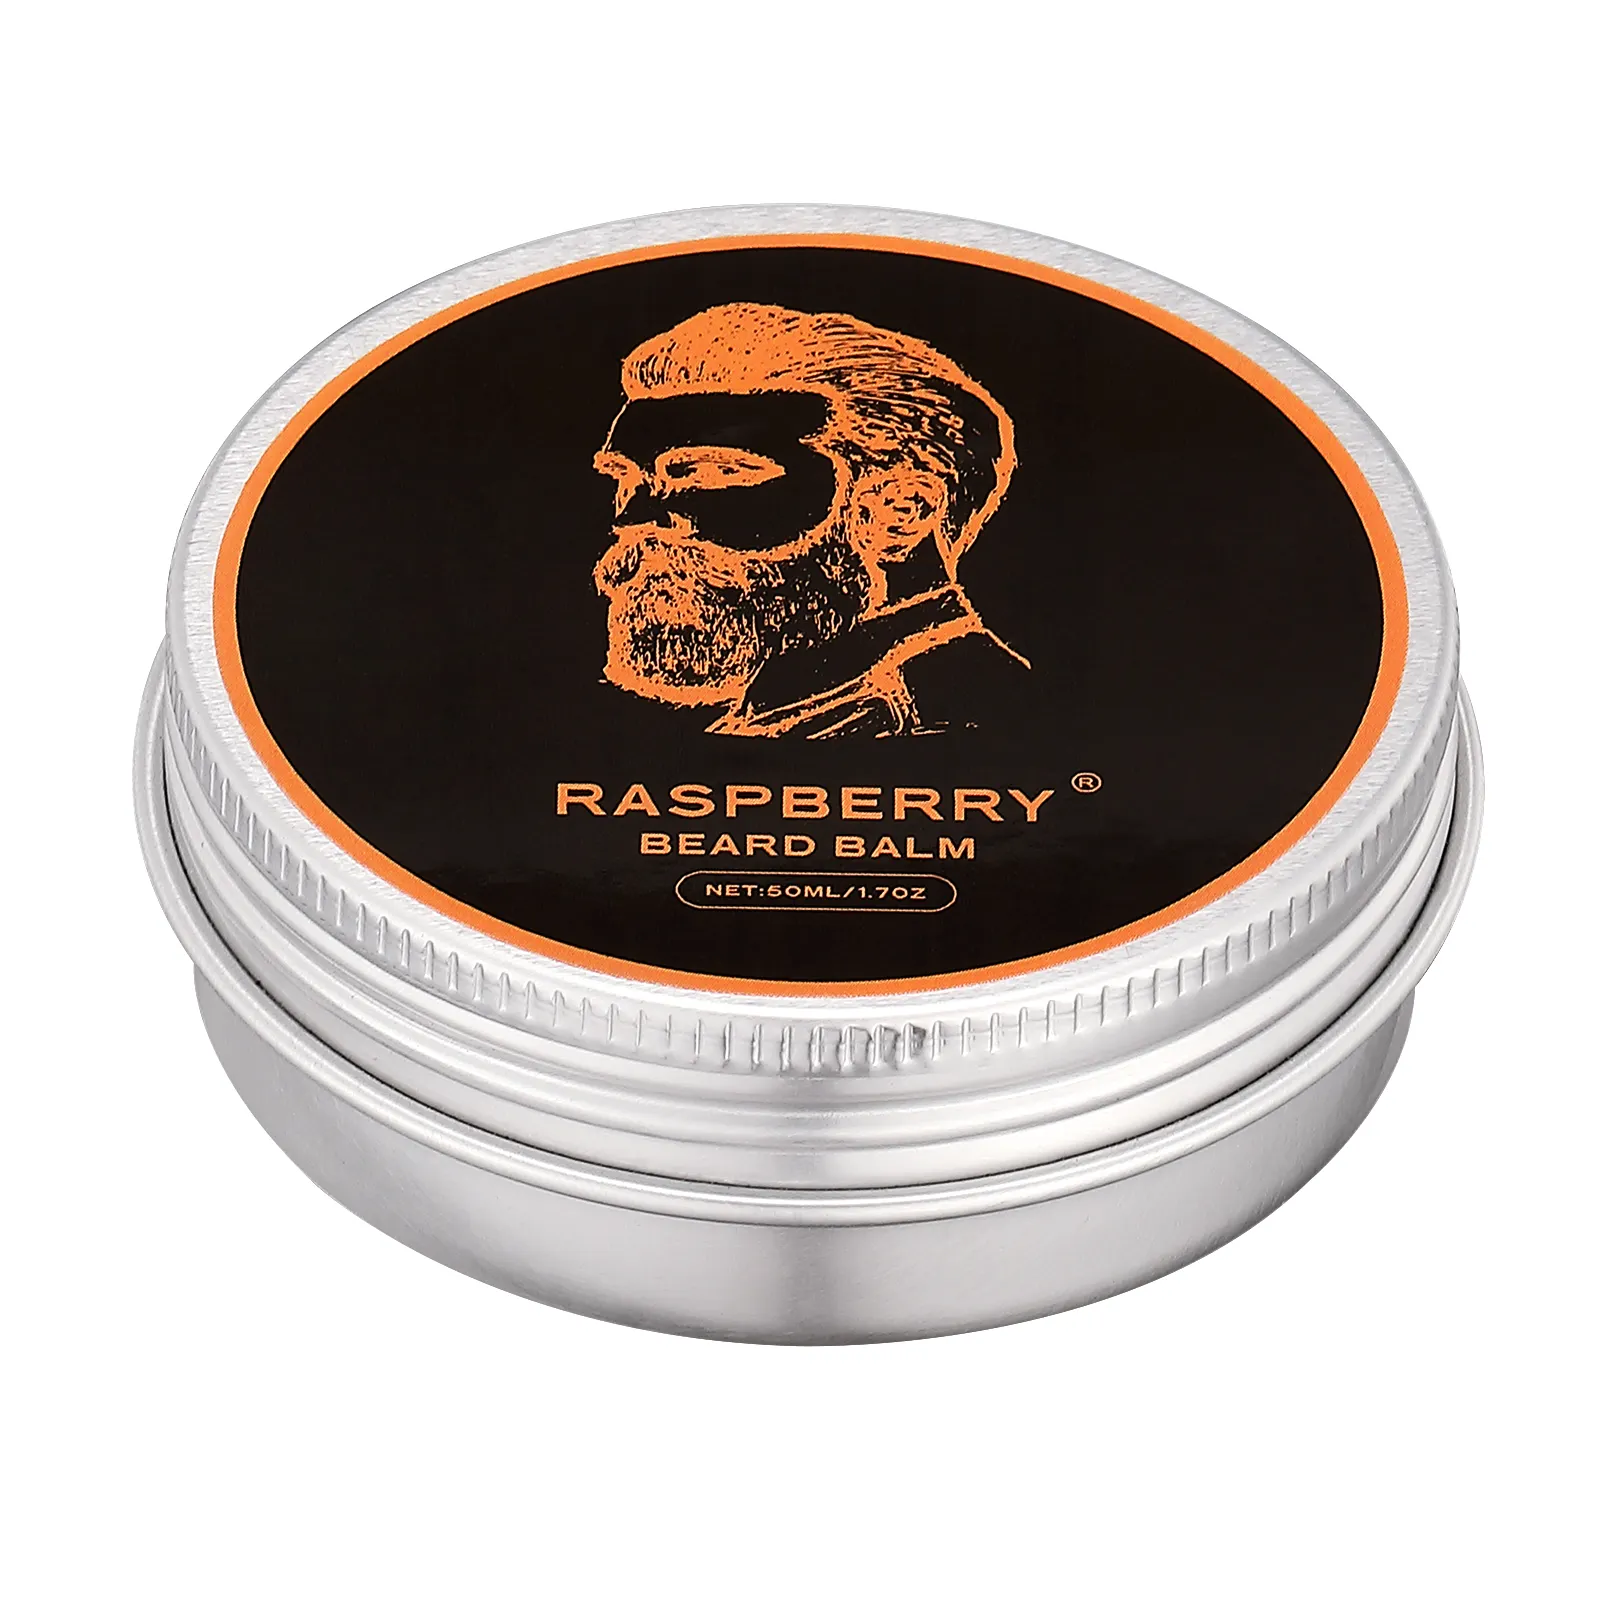 All Natural and Deeply Nourishing Waxy Scented Beard Balm for Any Bearded Daily Grooming and Maintenance Routine